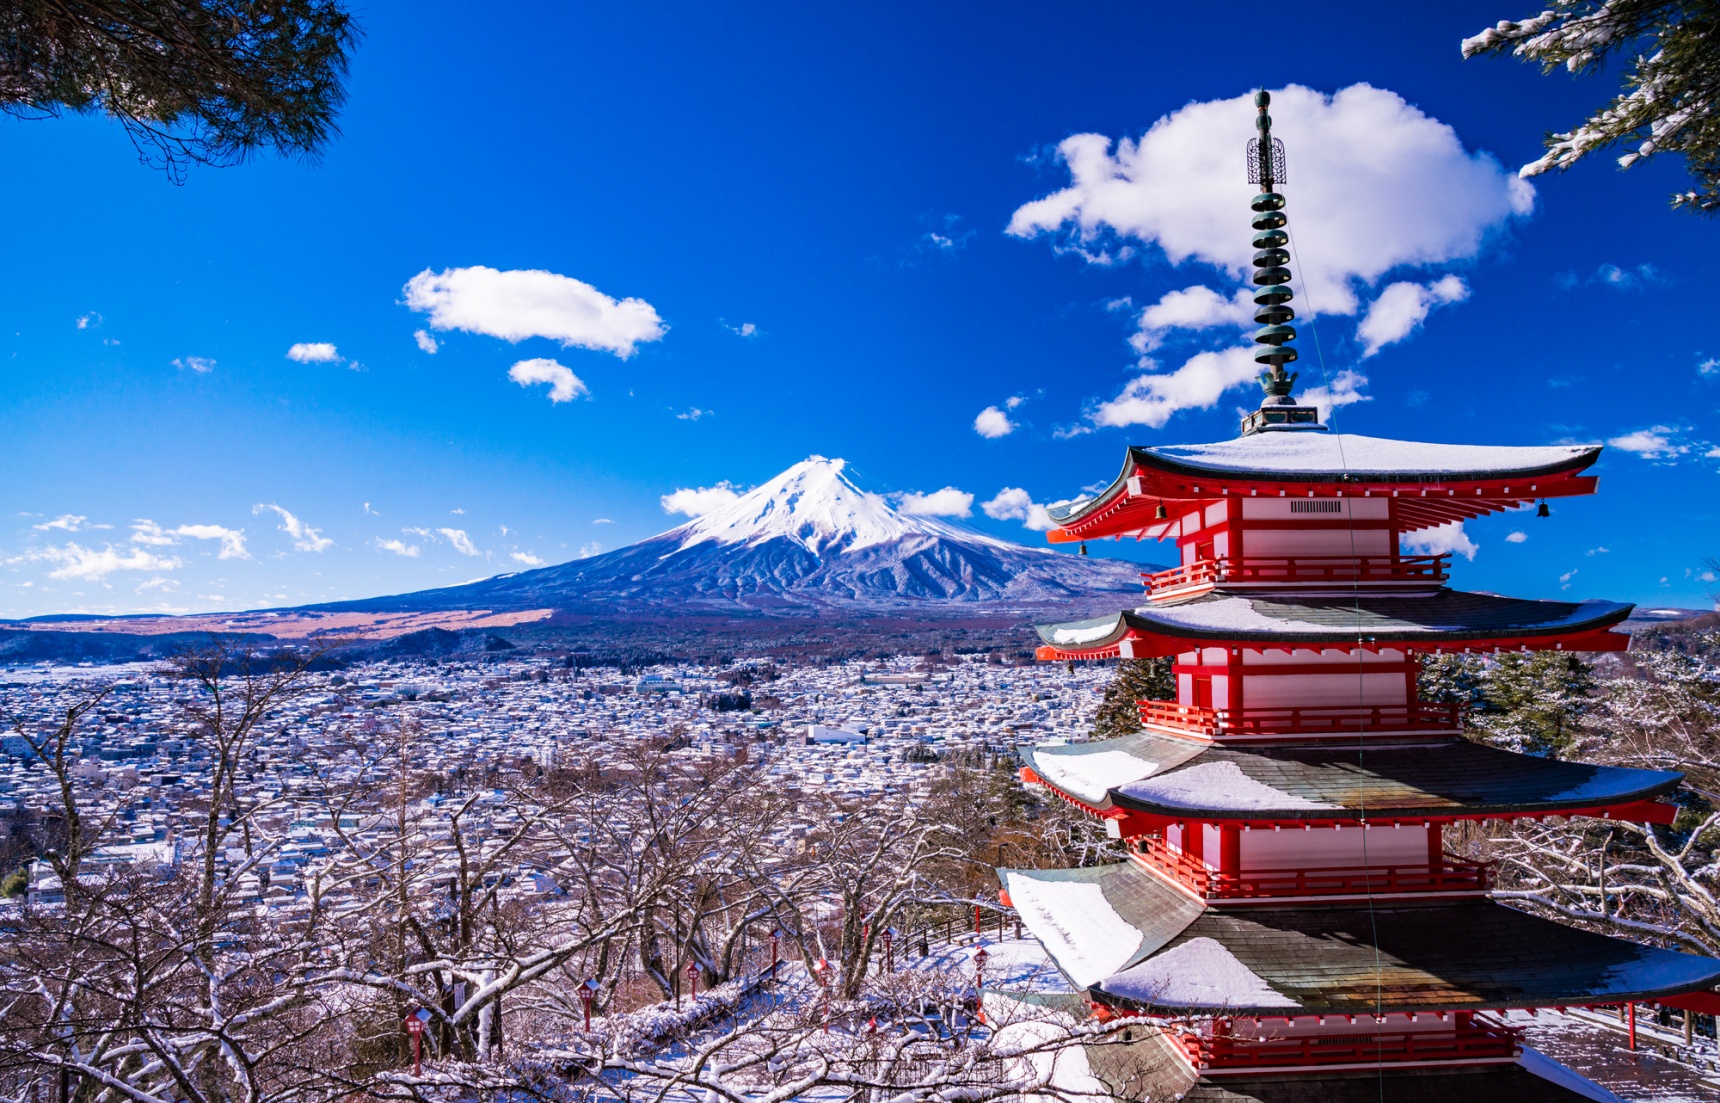 Winter Tips for Visiting Japan